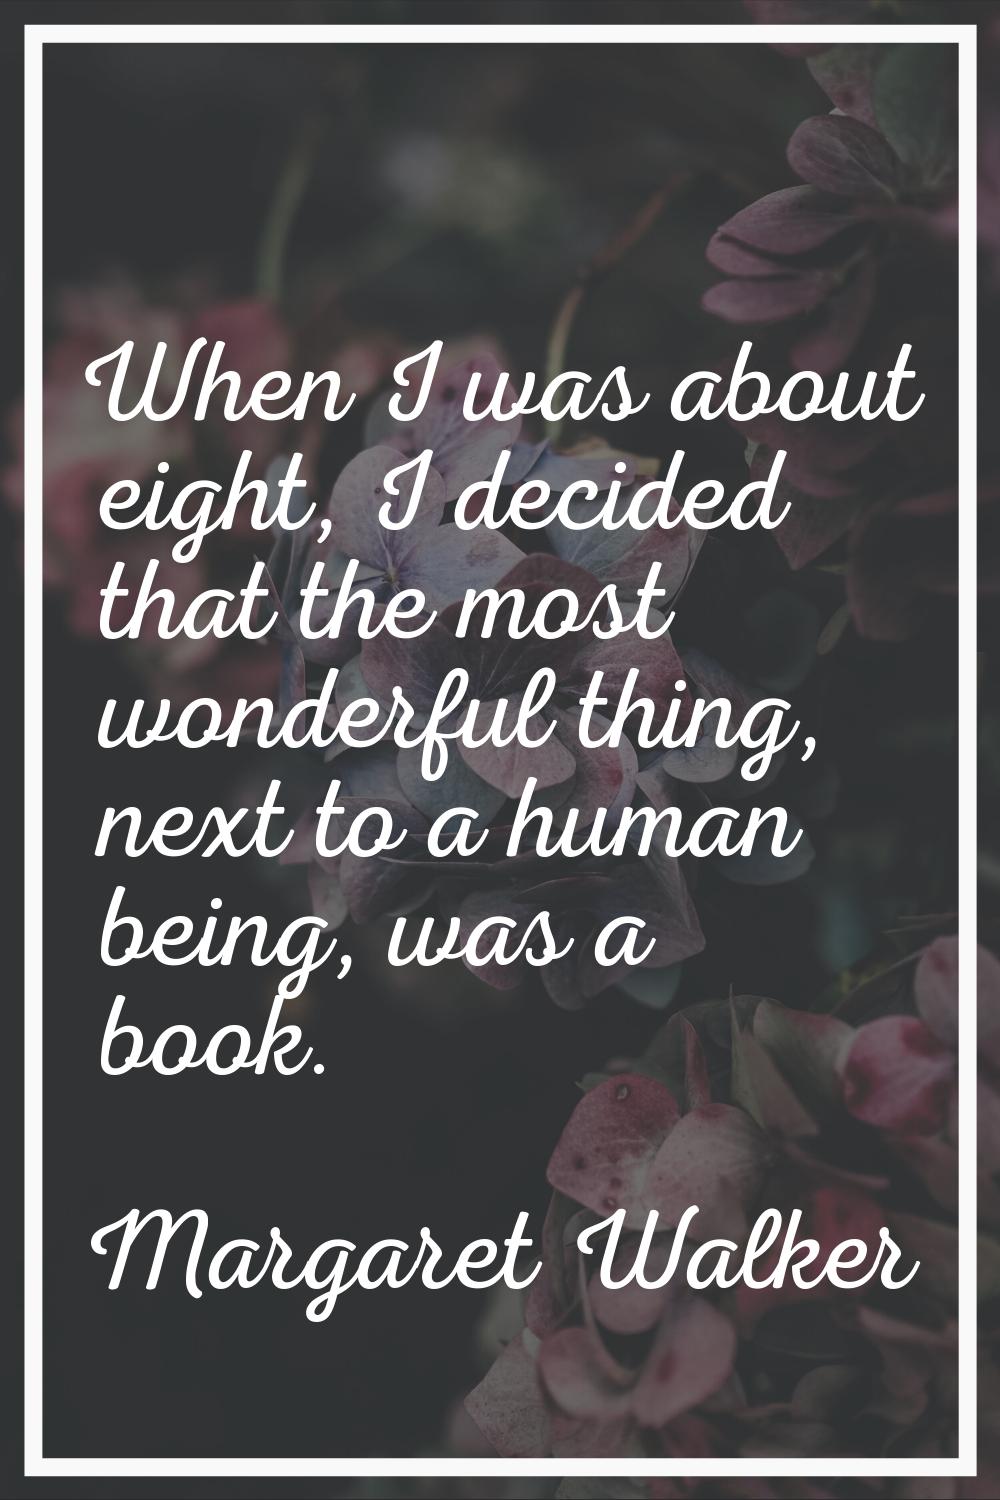 When I was about eight, I decided that the most wonderful thing, next to a human being, was a book.